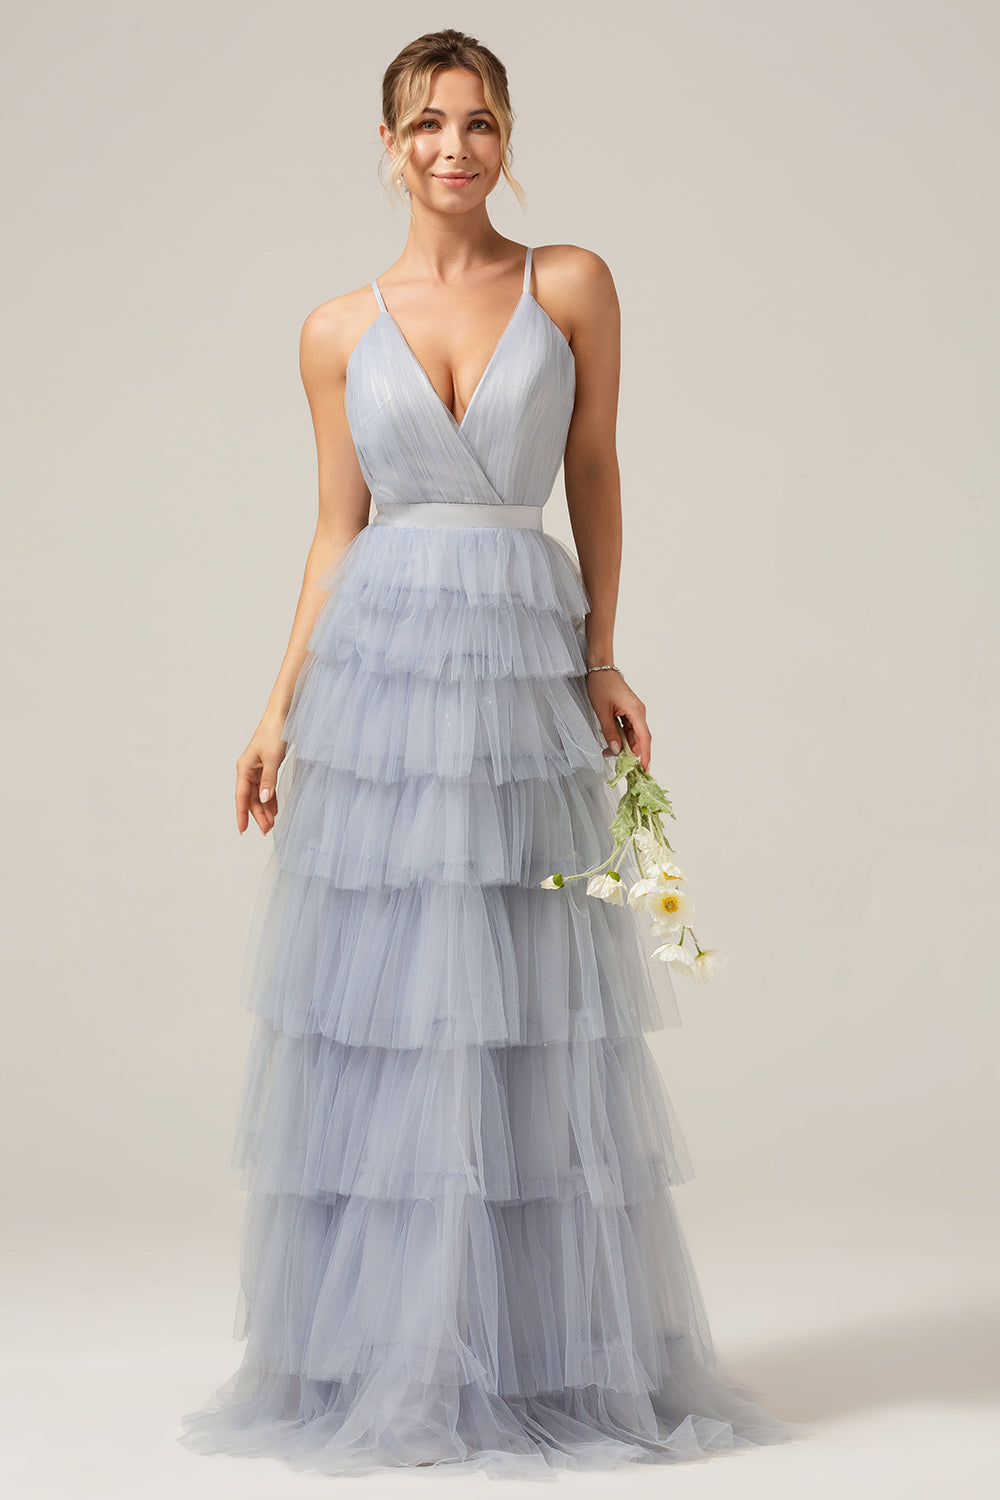 Grey Blue A Line Tiered Tulle Formal Dress